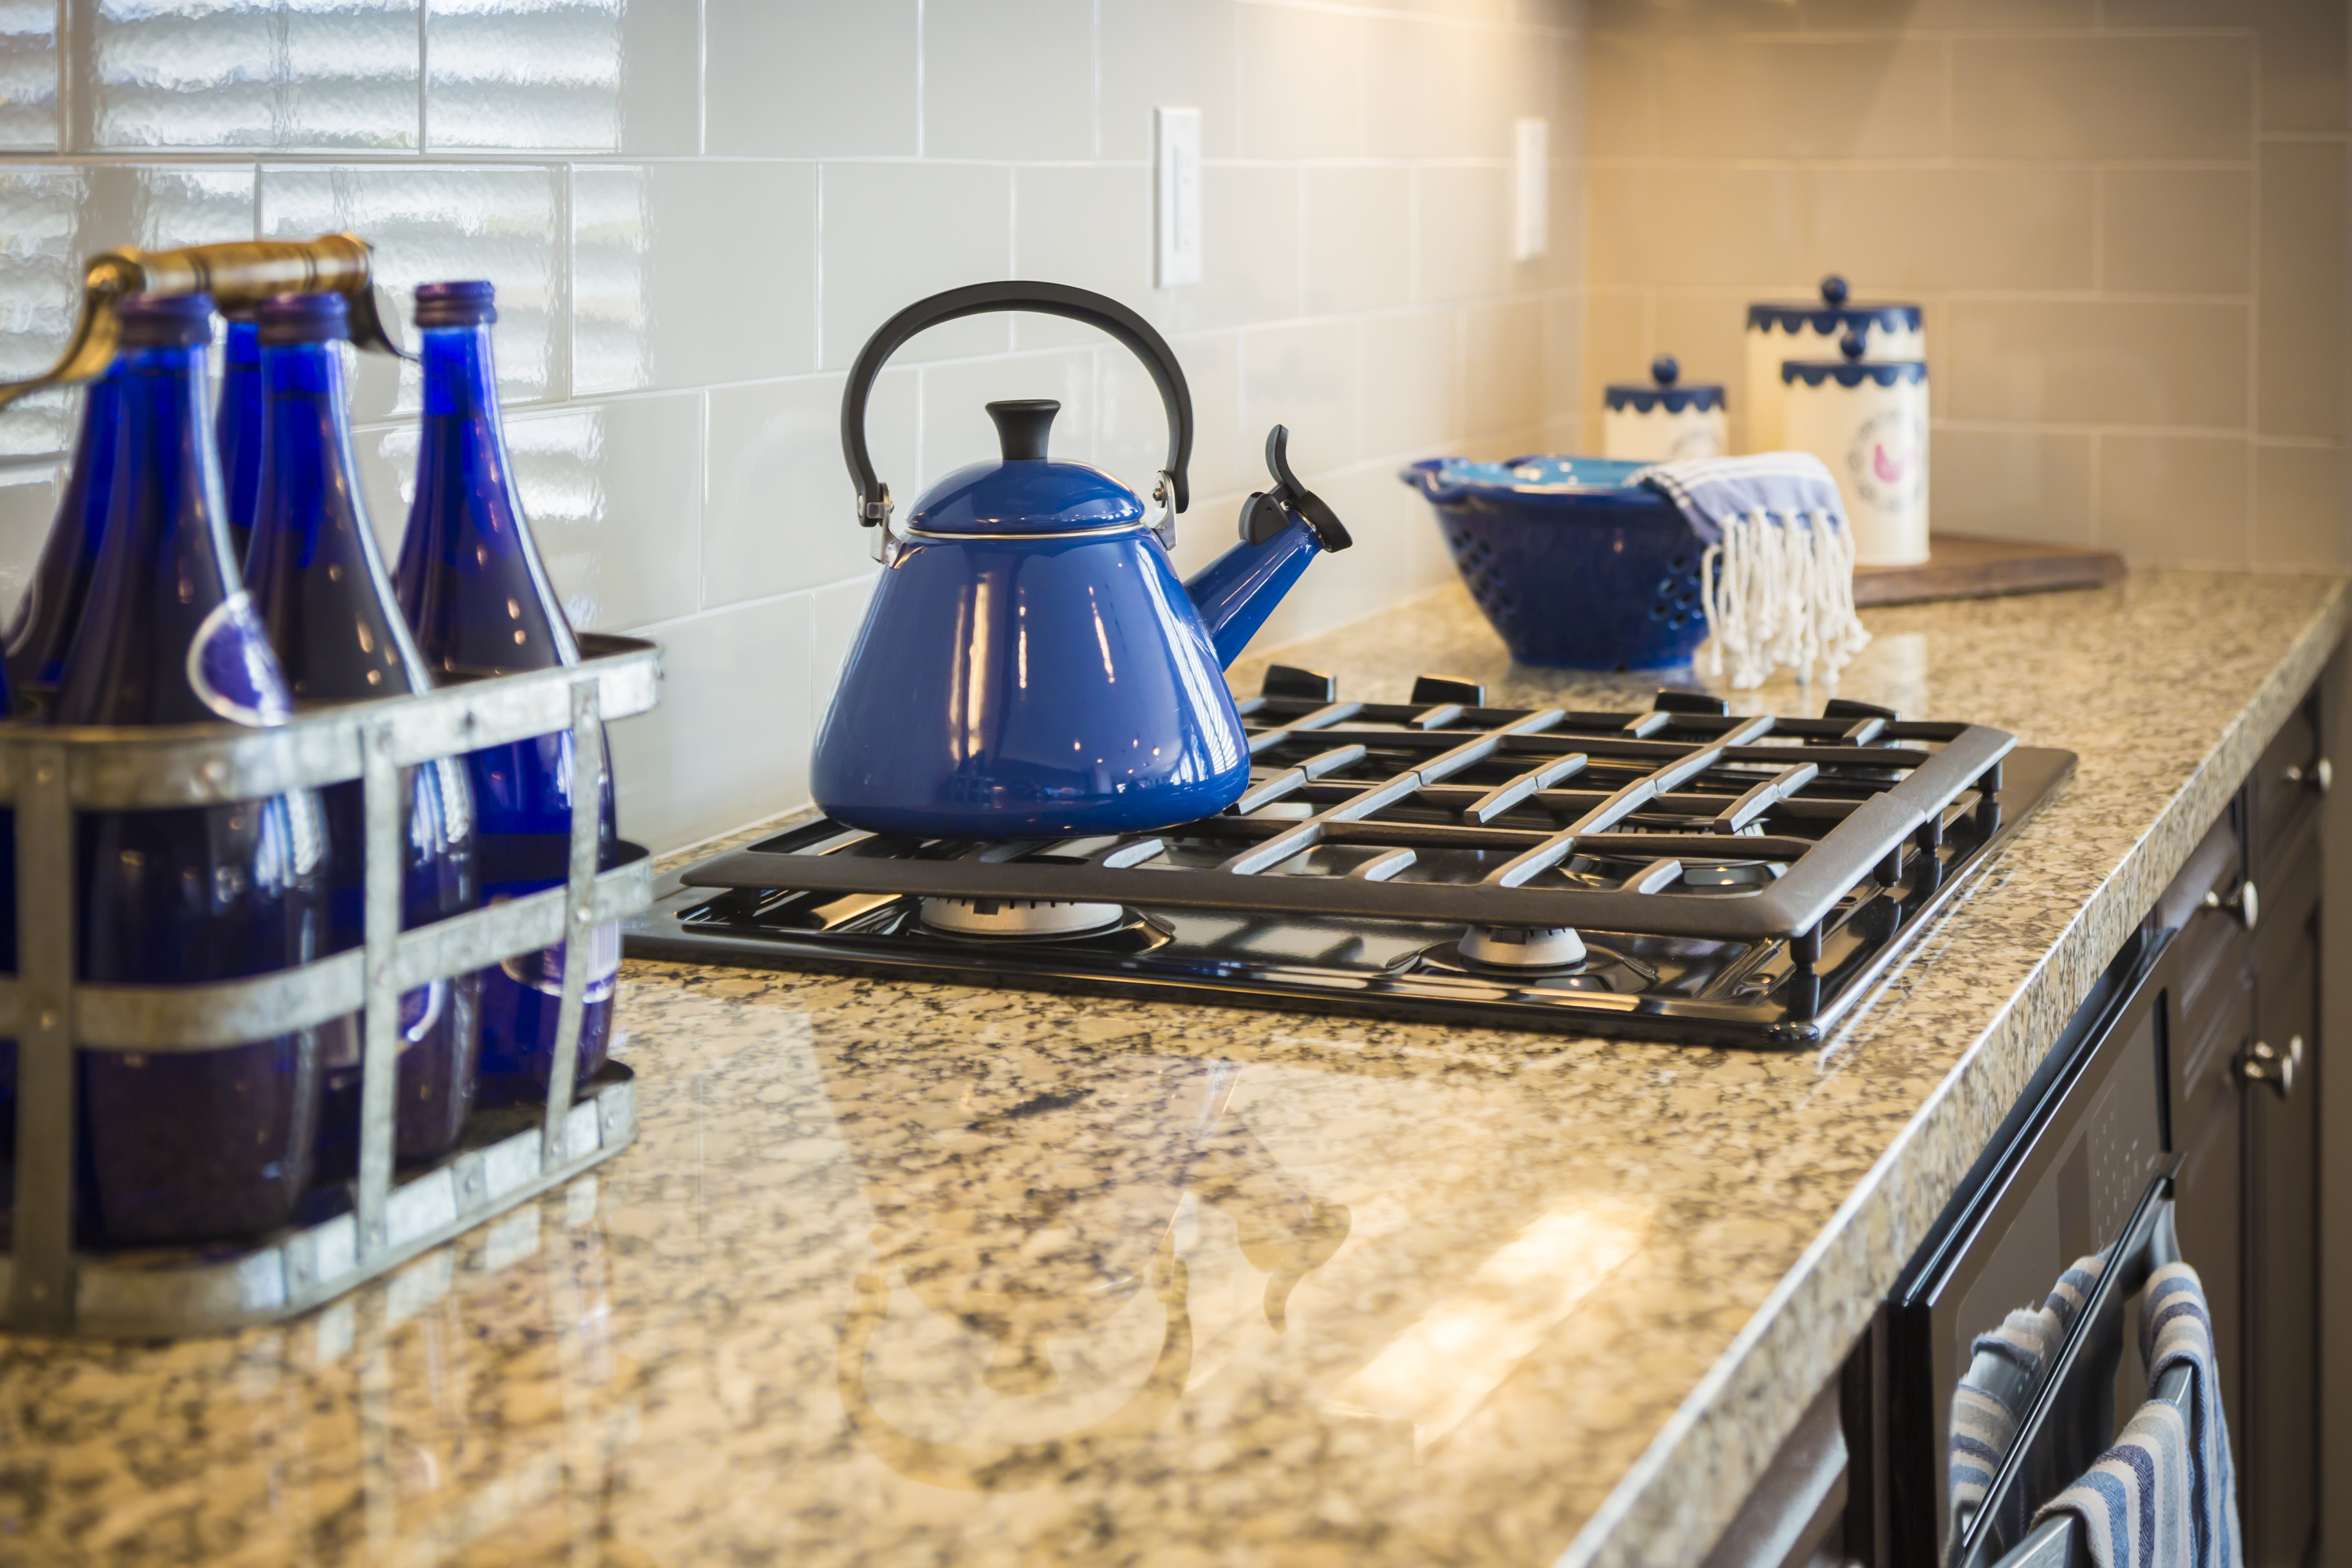 Bautiful Marble Kitchen Counter and Stove With Cobalt Blue Decor.